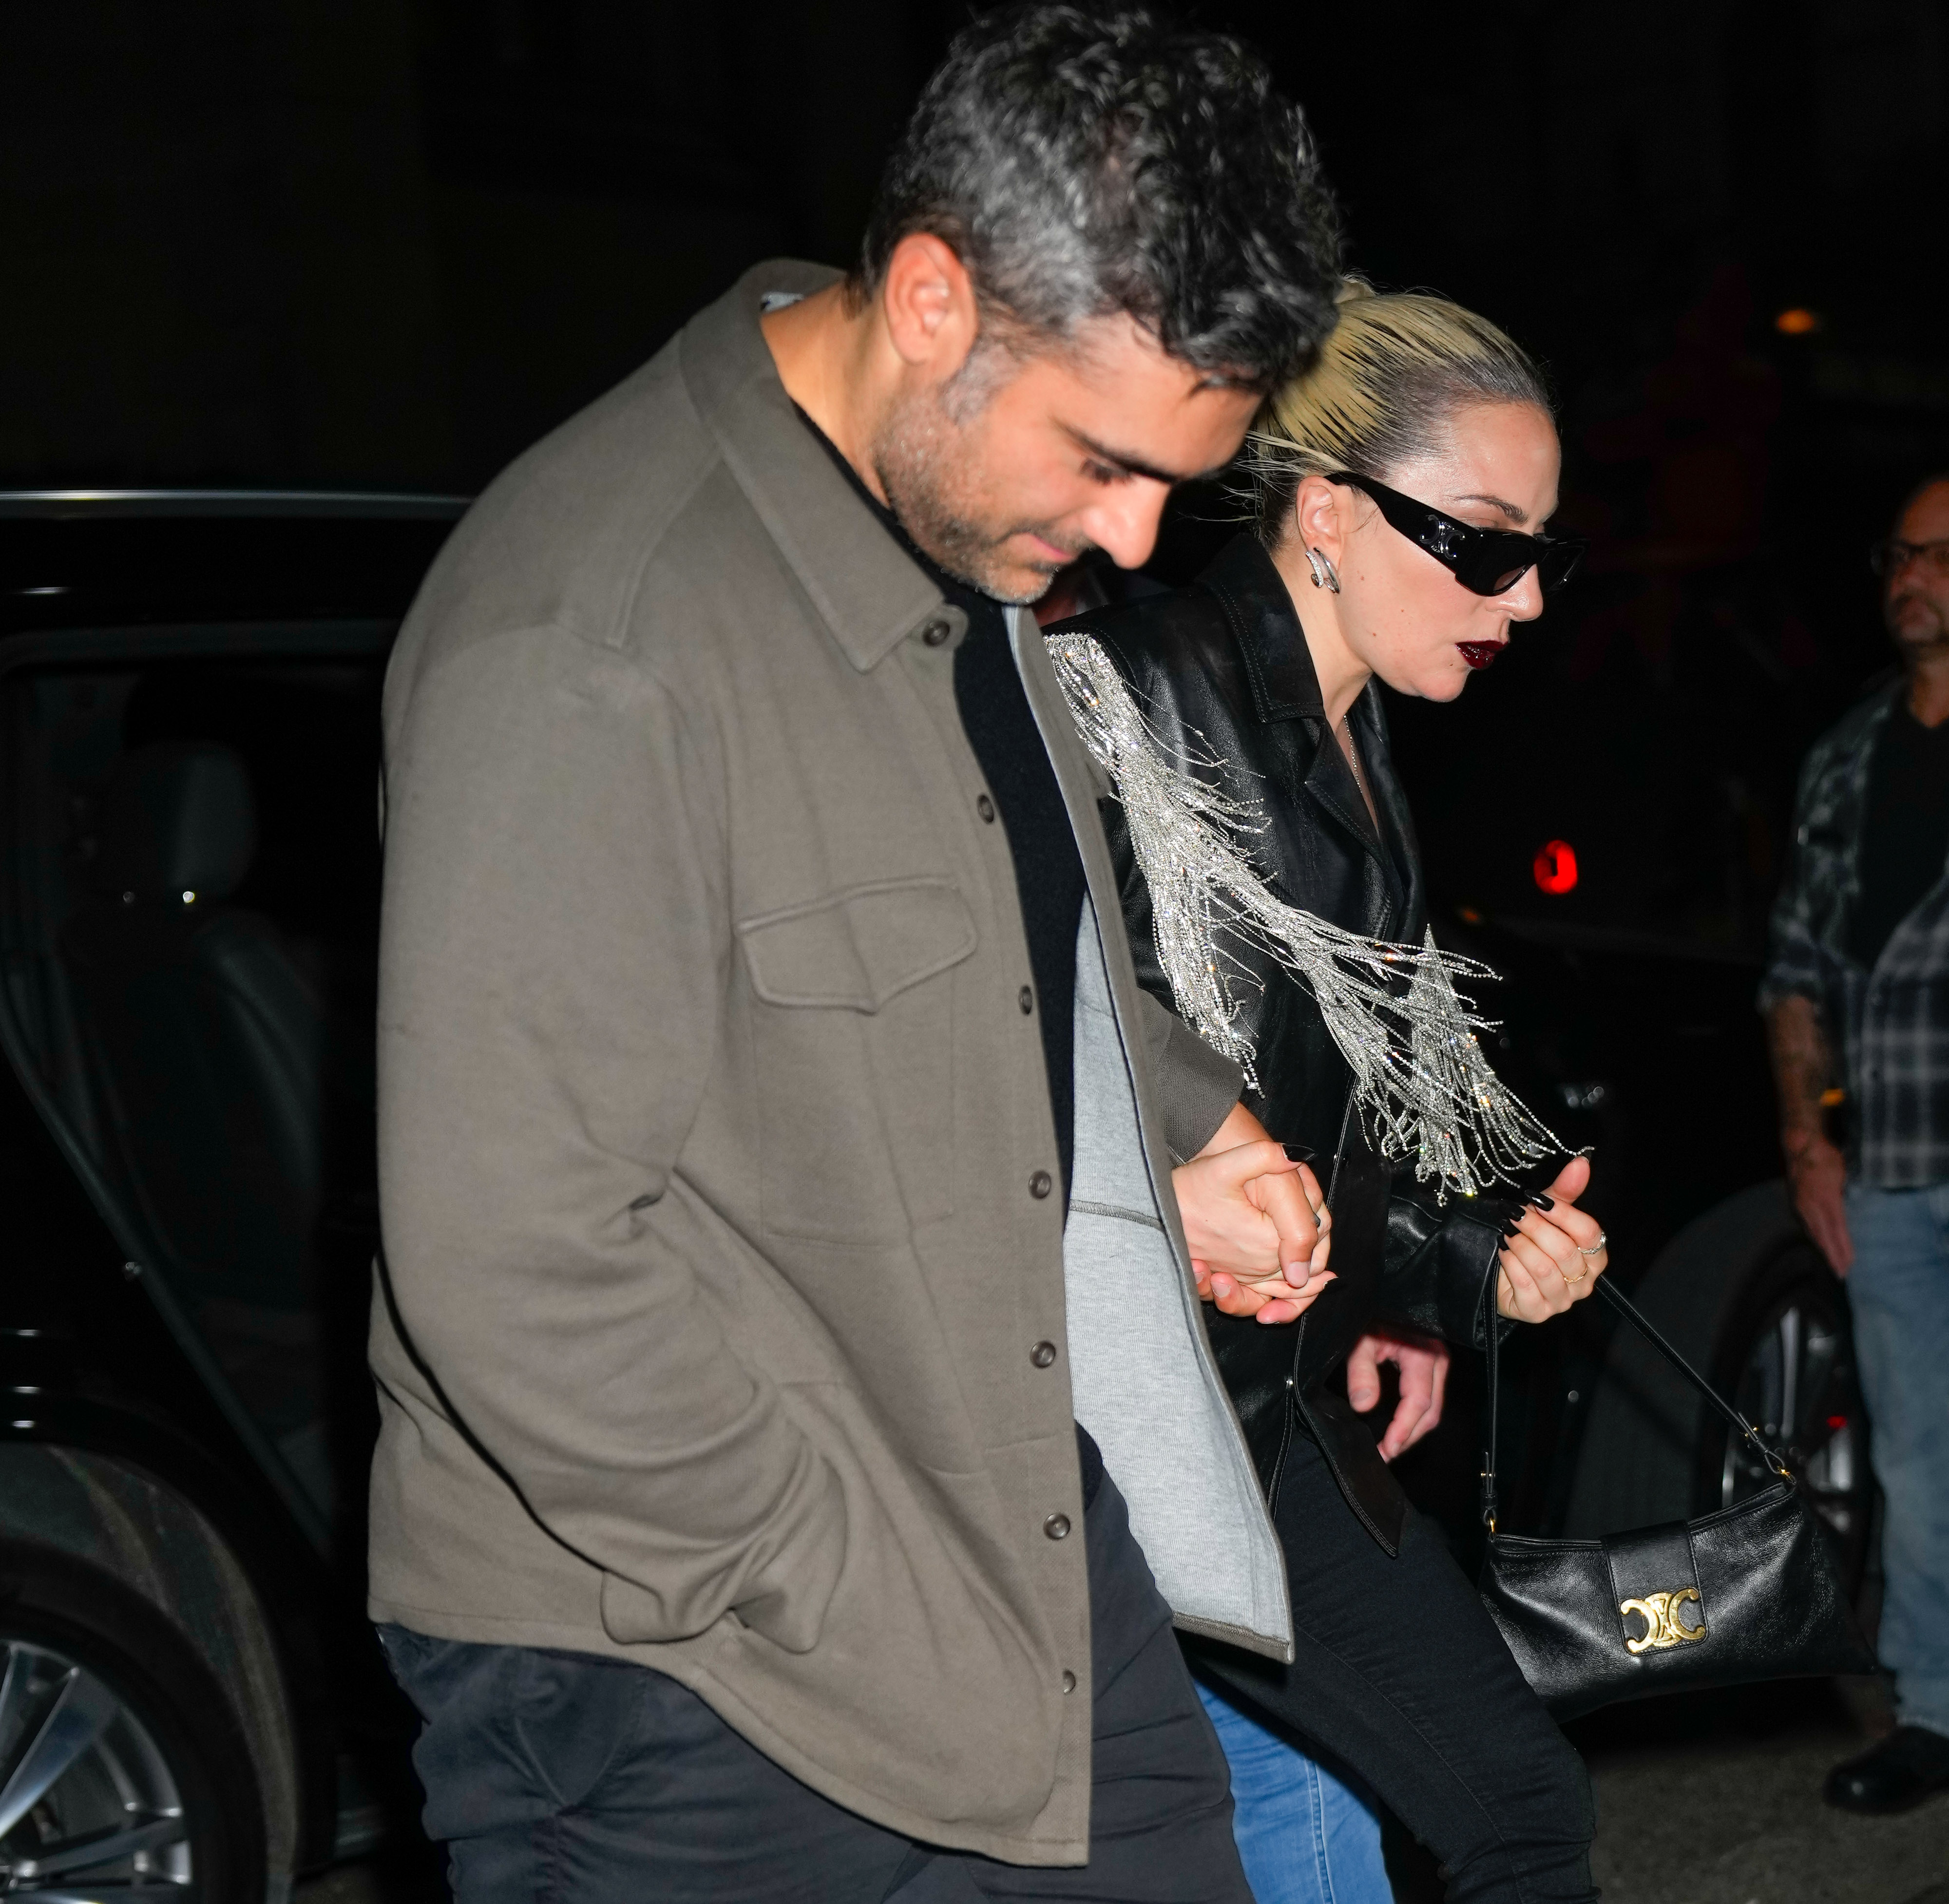 Gaga recently sparked engagement rumors with her boyfriend Michael Polansky